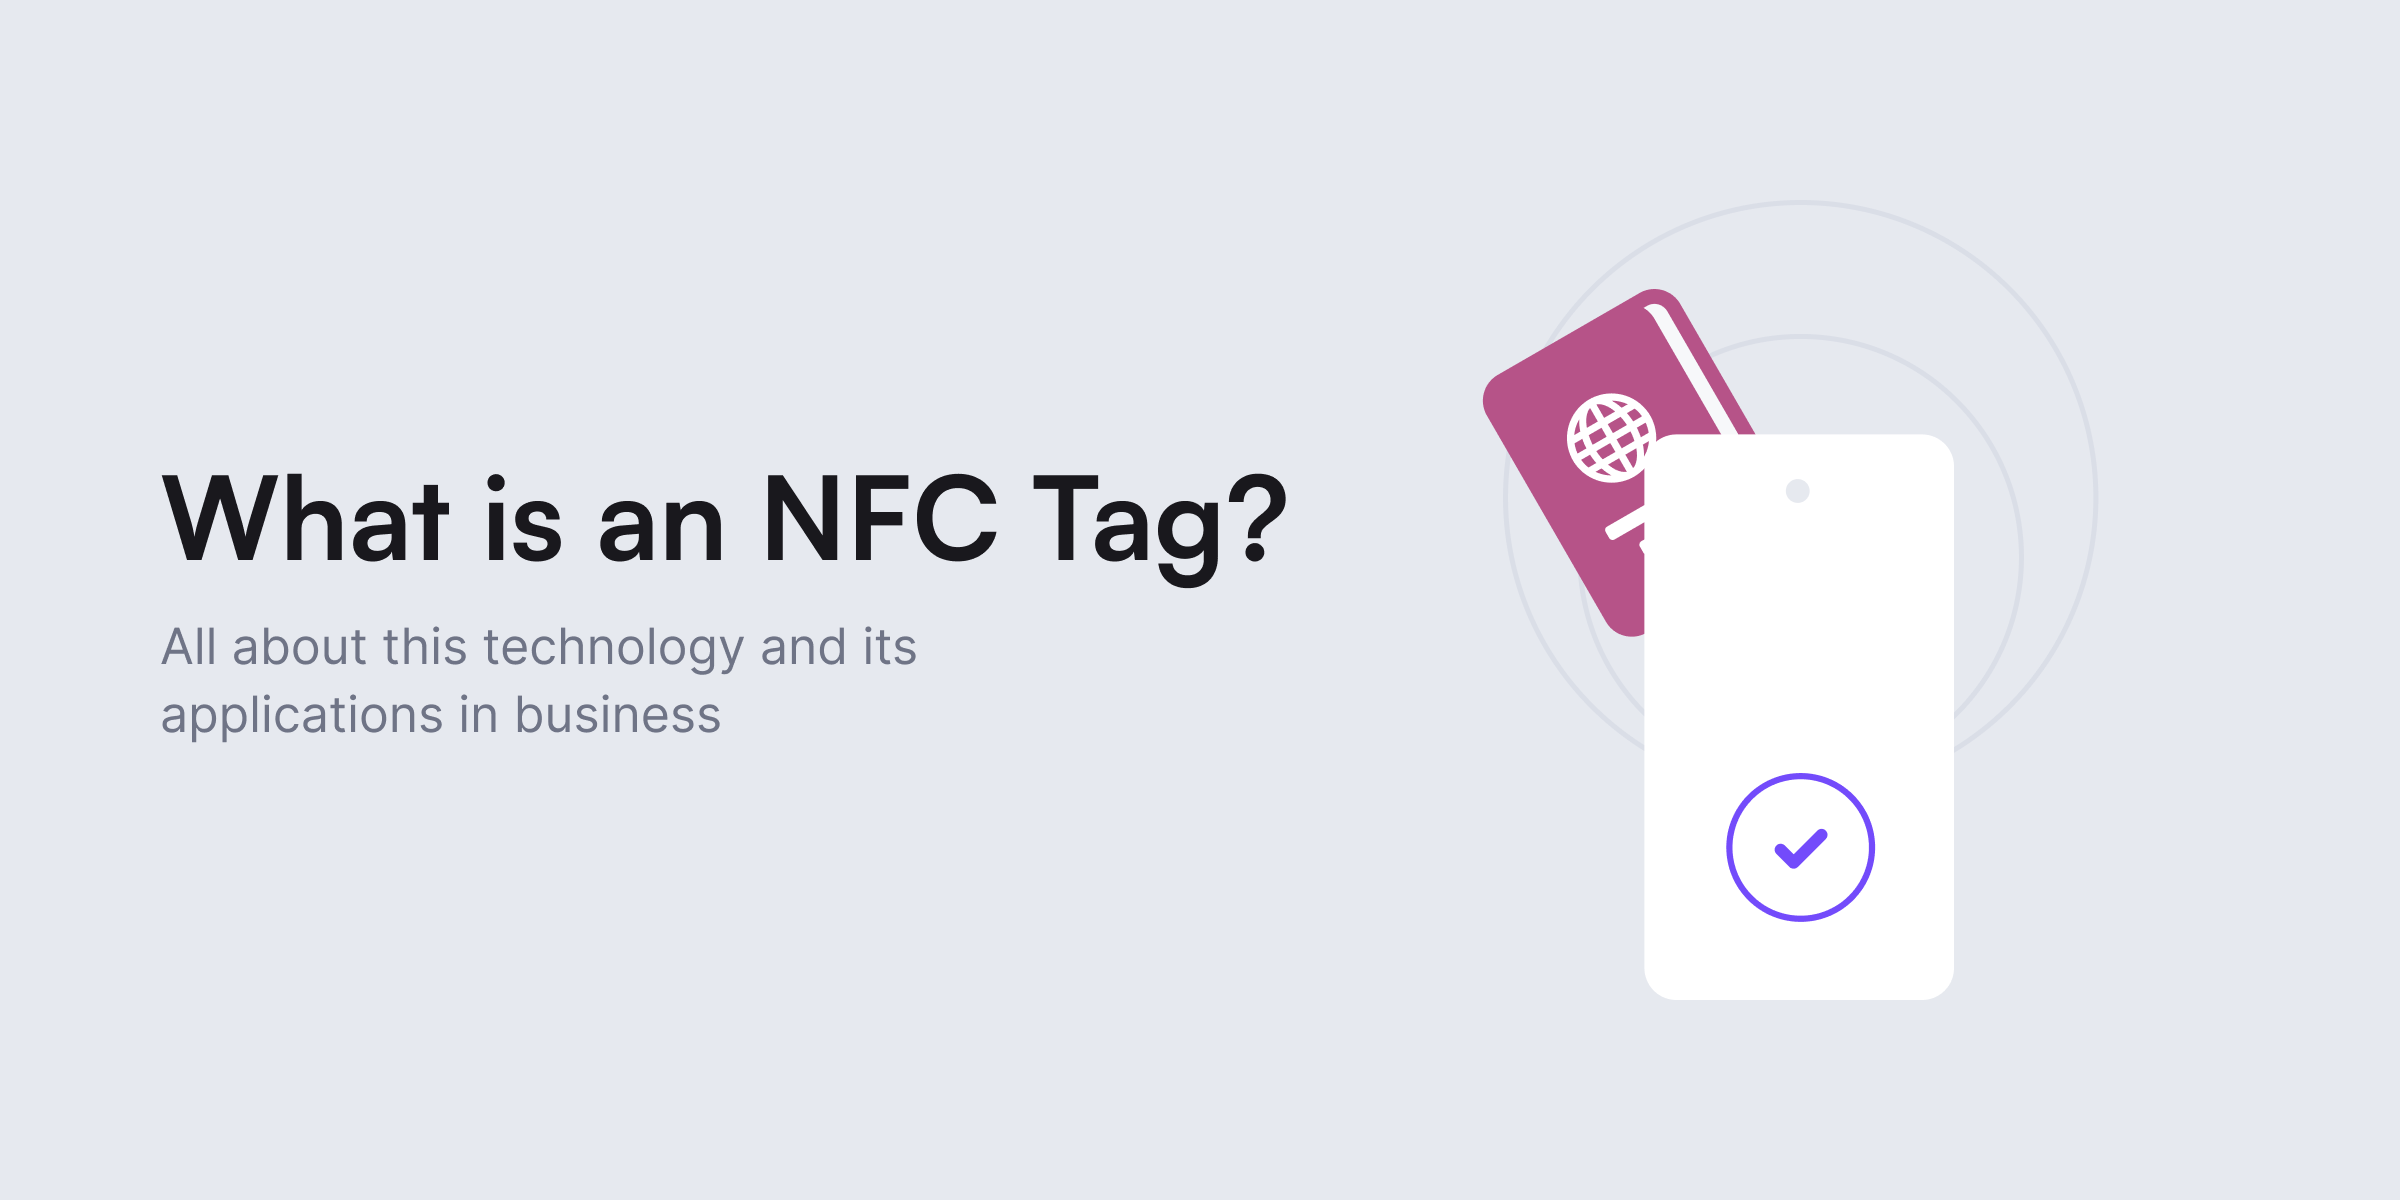 What's an NFC Tag?